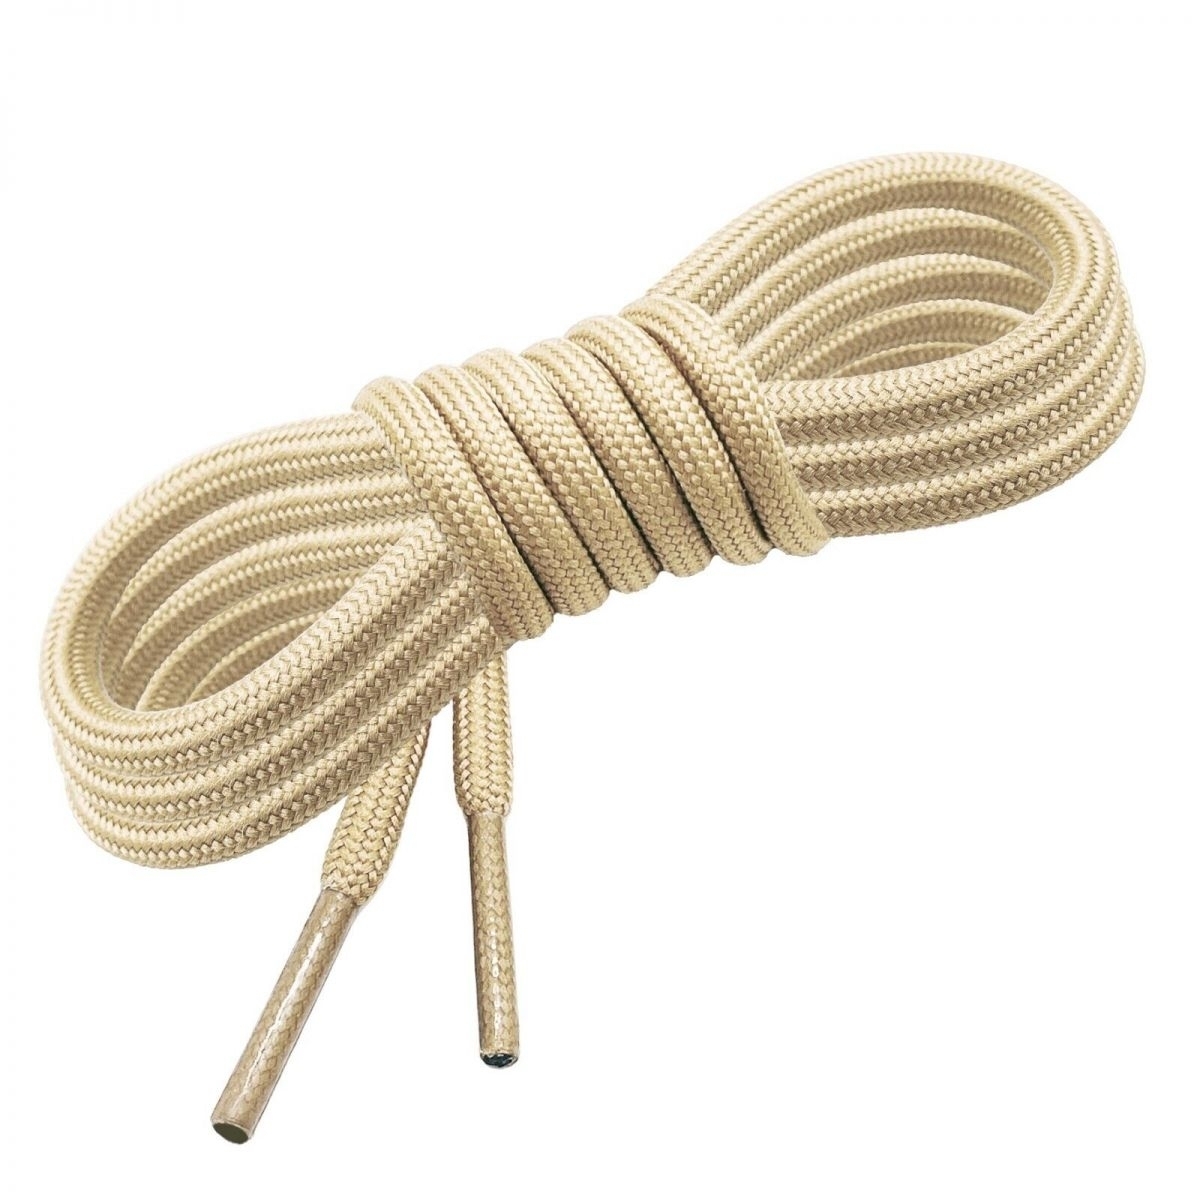 36-inch Replacement Round Shoe Laces Beige (1 Pair) - 36-ROPE BEIGE 36 Inch BEIGE